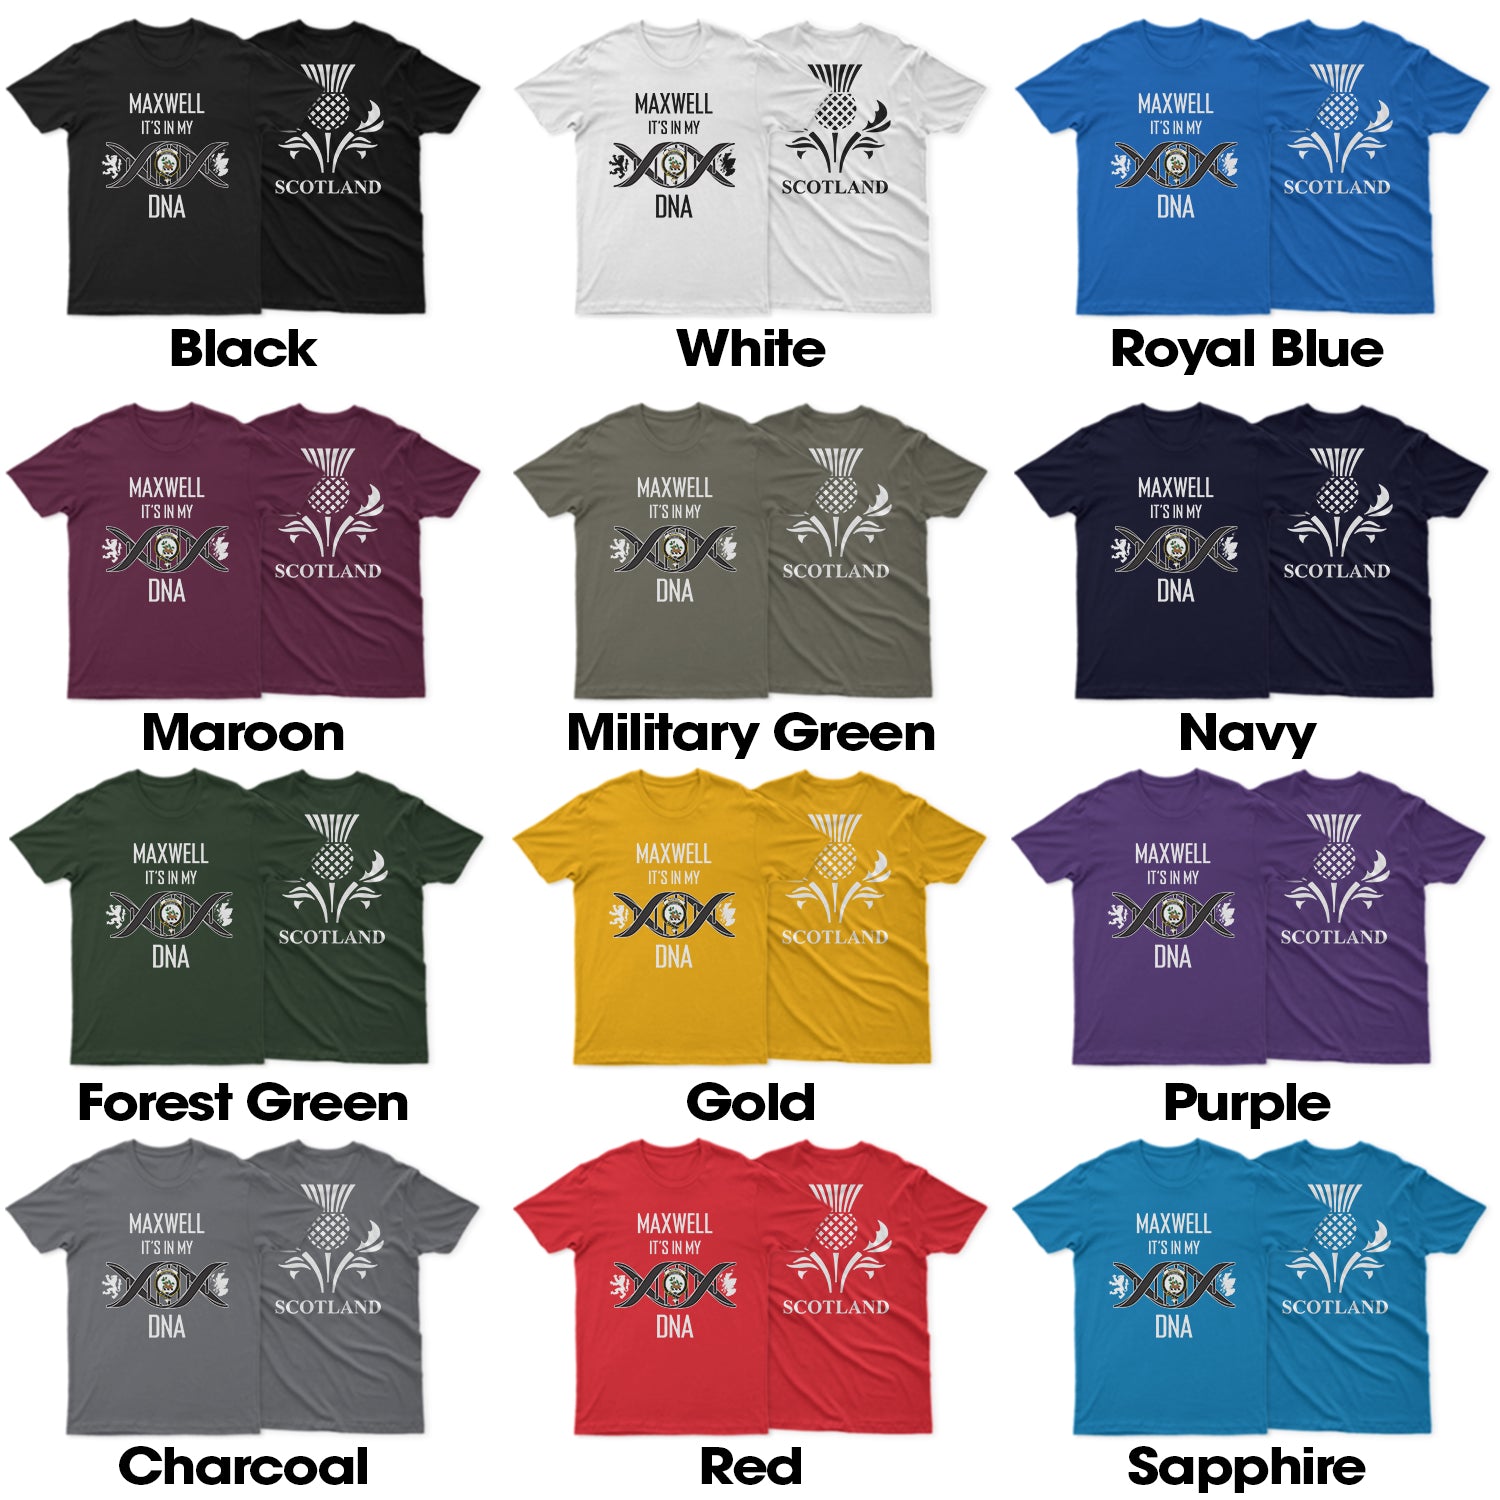 maxwell-family-crest-dna-in-me-mens-t-shirt